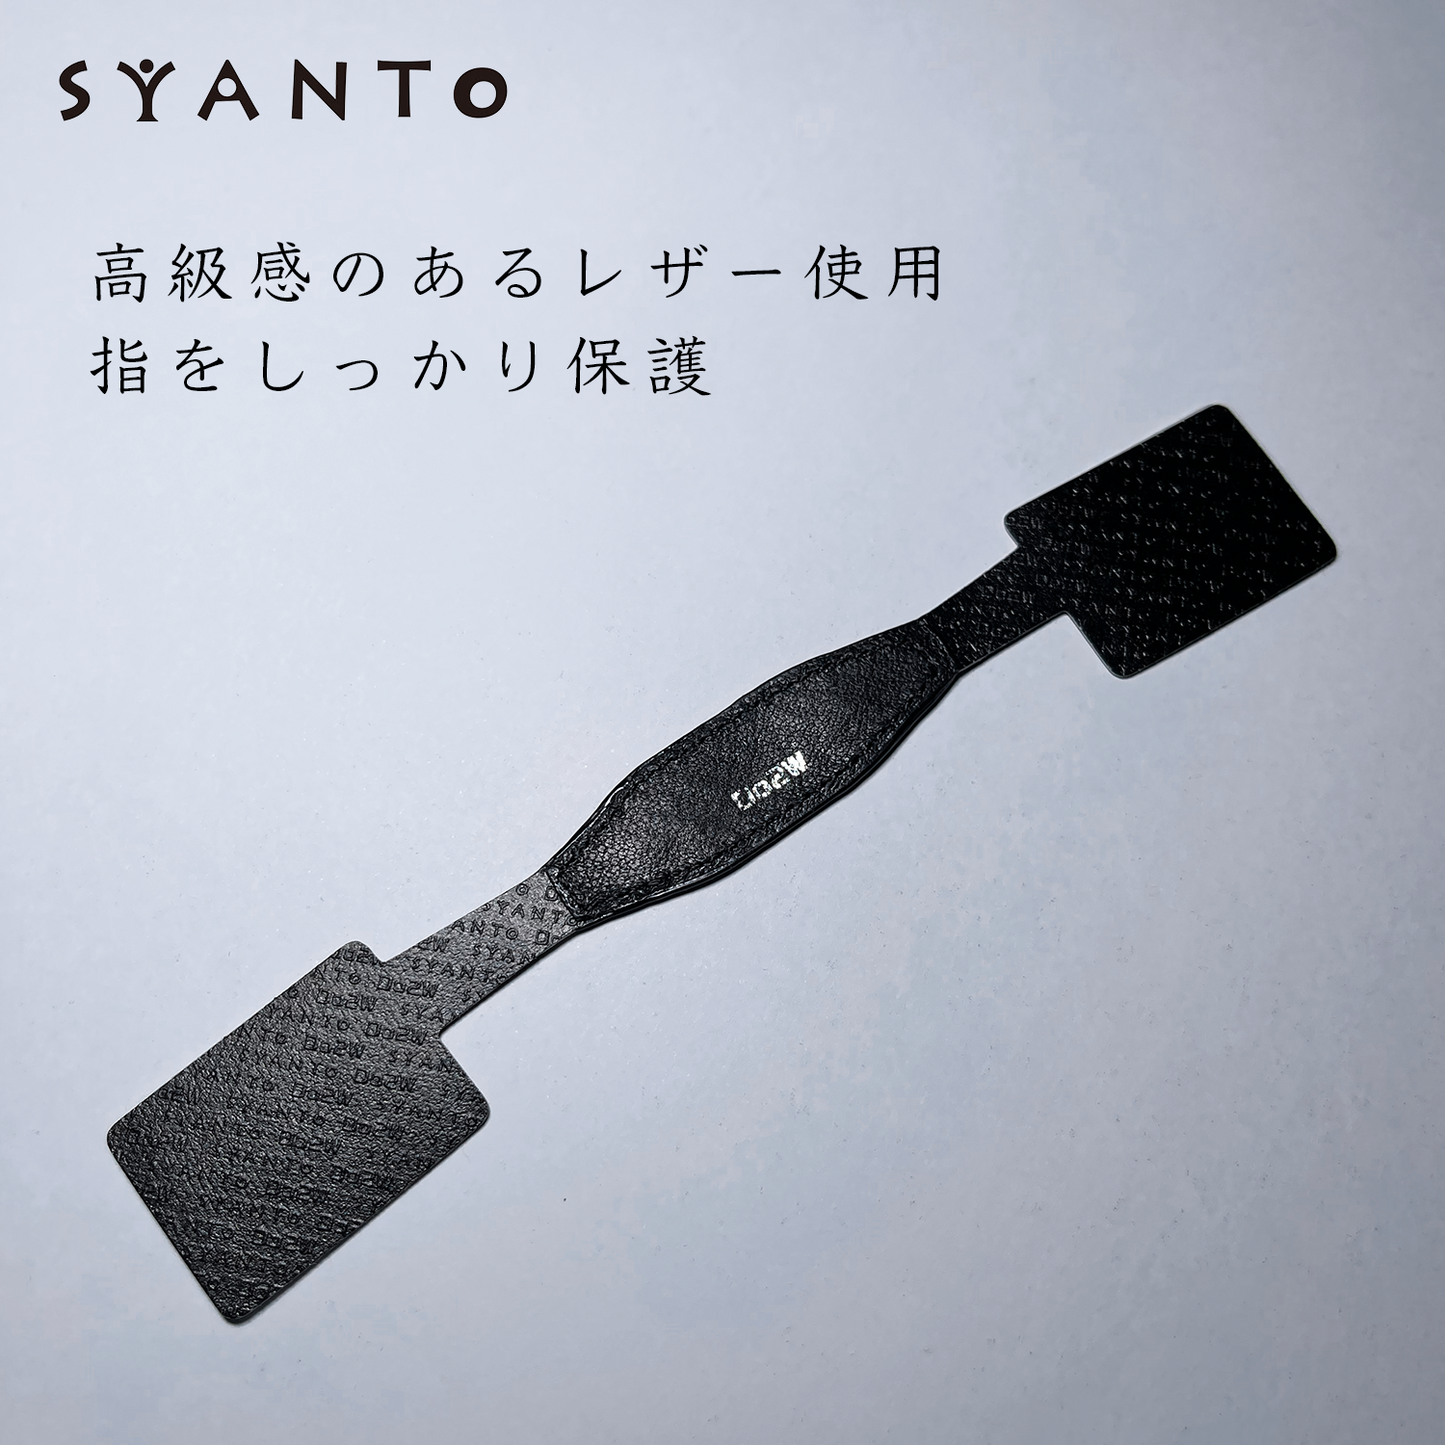 SYANTO Ring U All-Leather Supports the bottom to shunt your posture and neck.